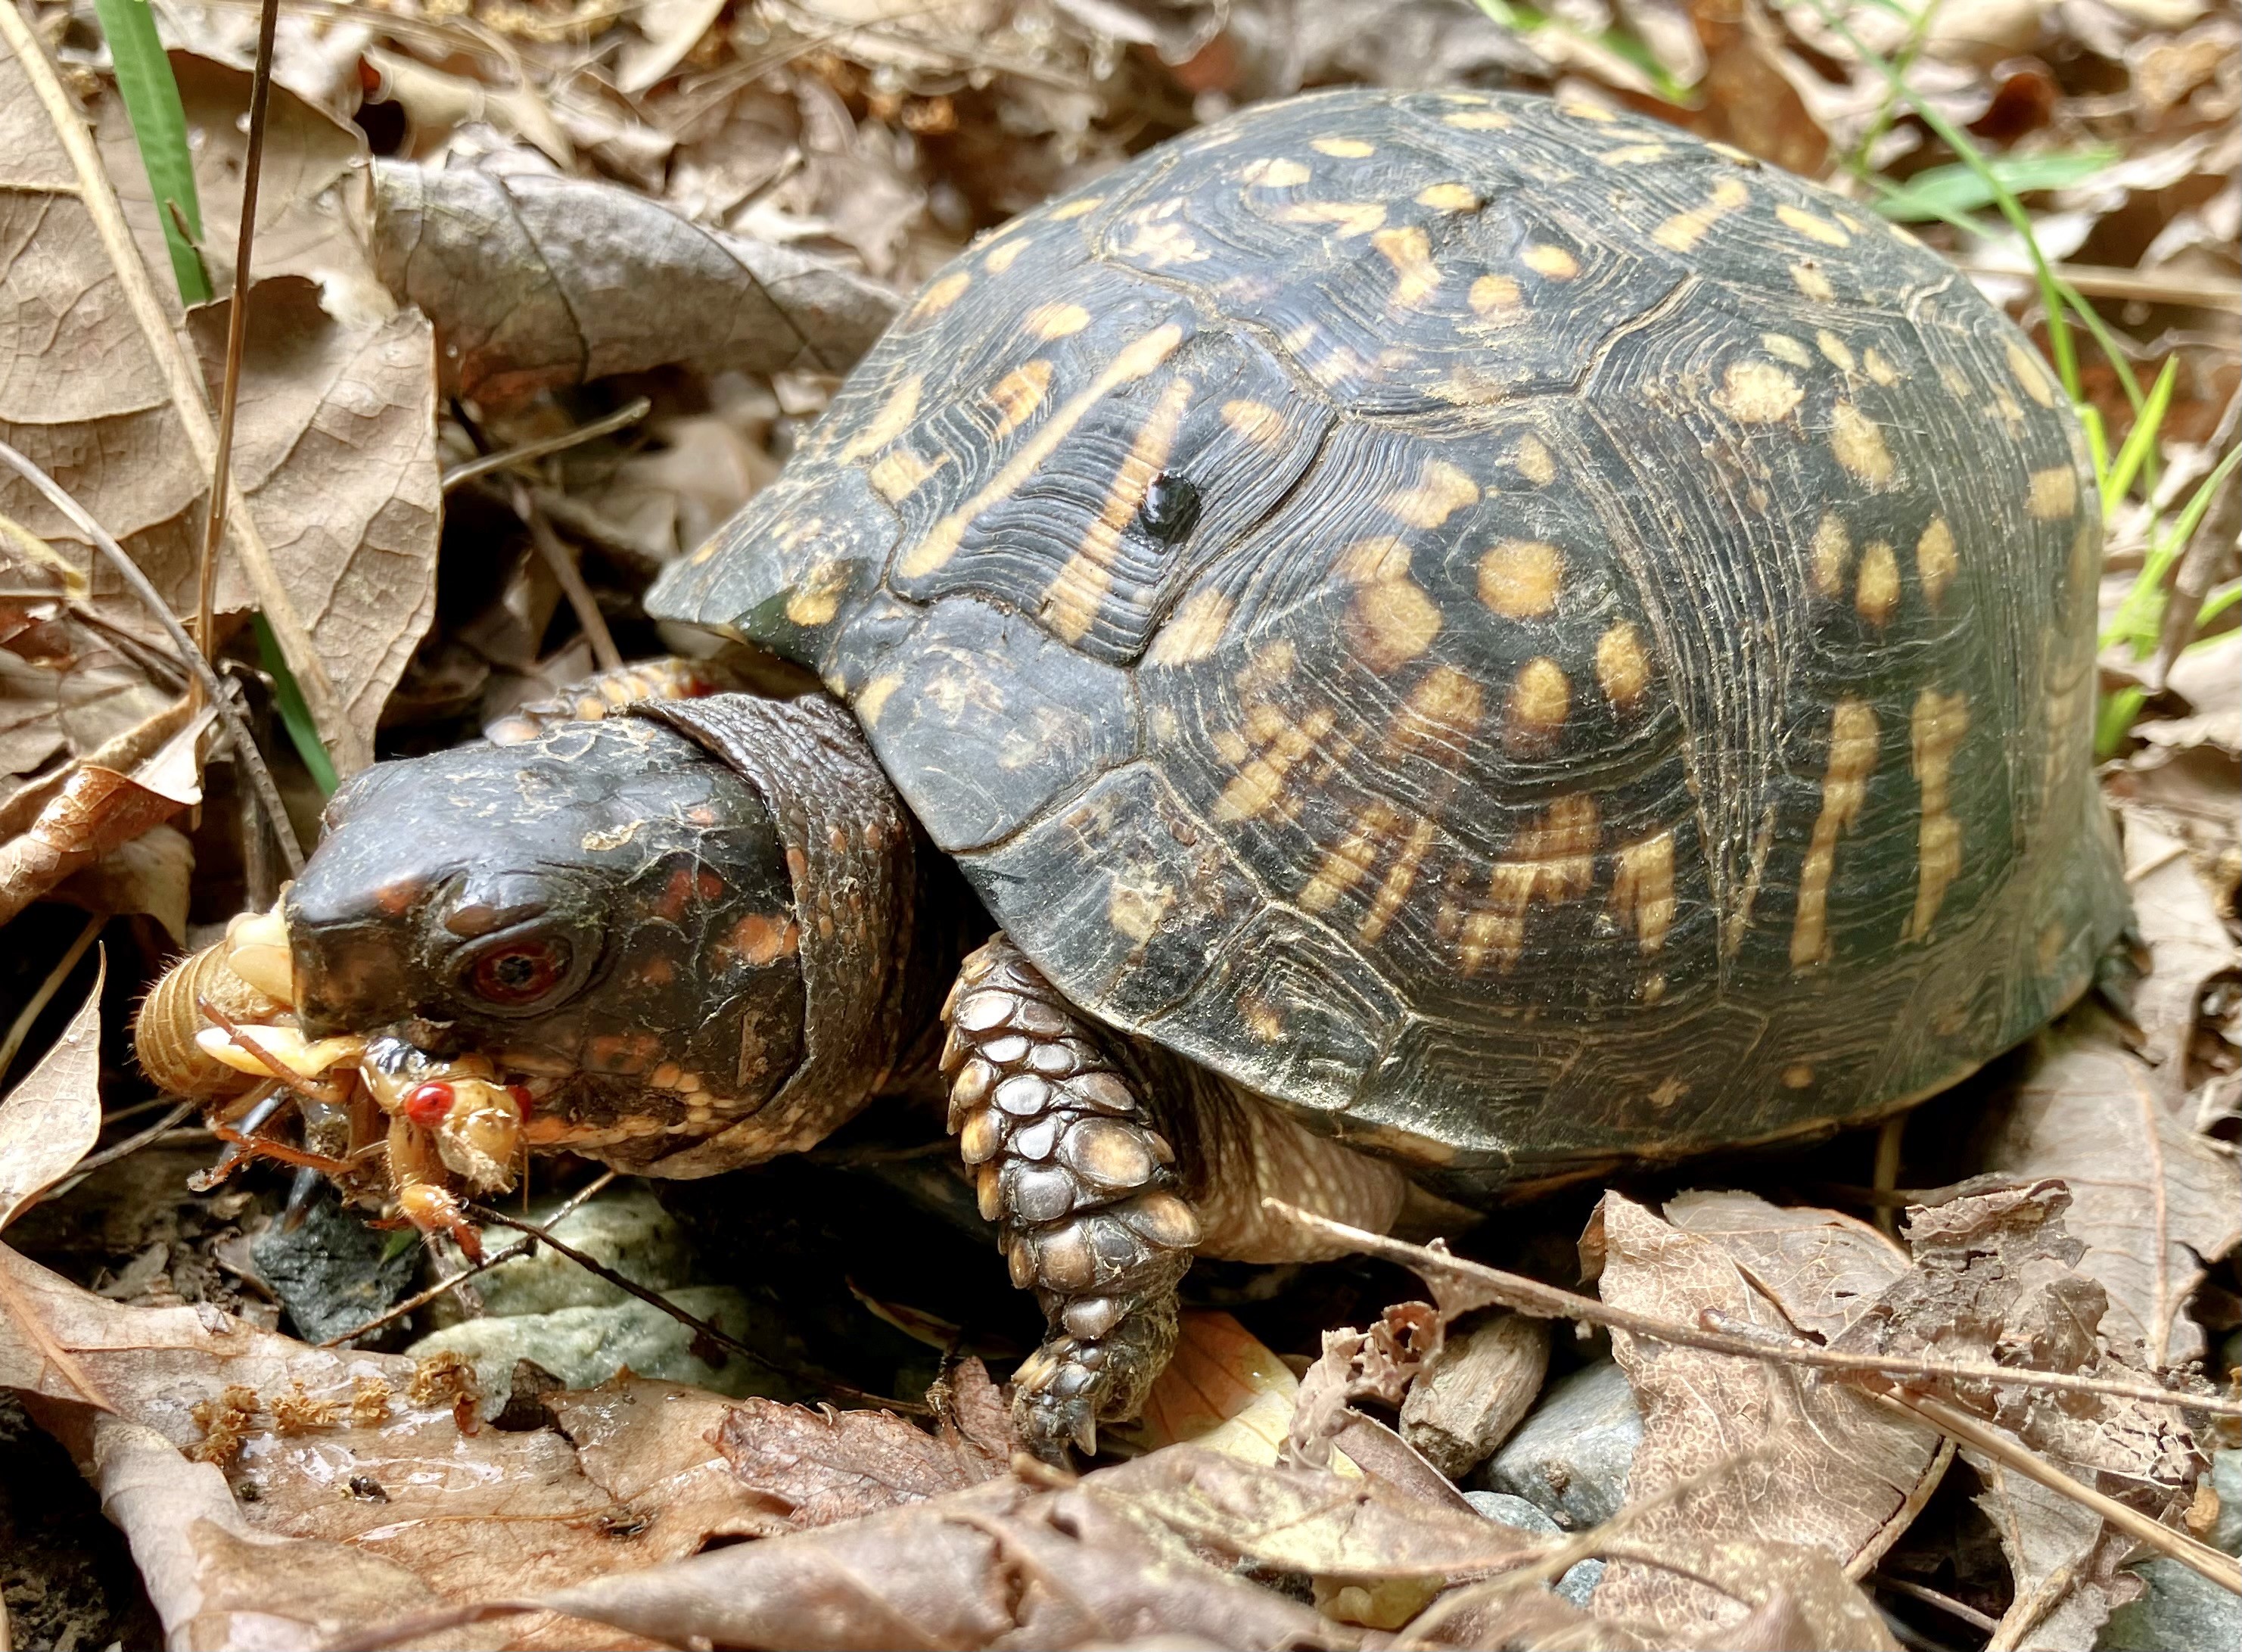 An orange-and-black turtle is cronching a cicada with bright red eyes.